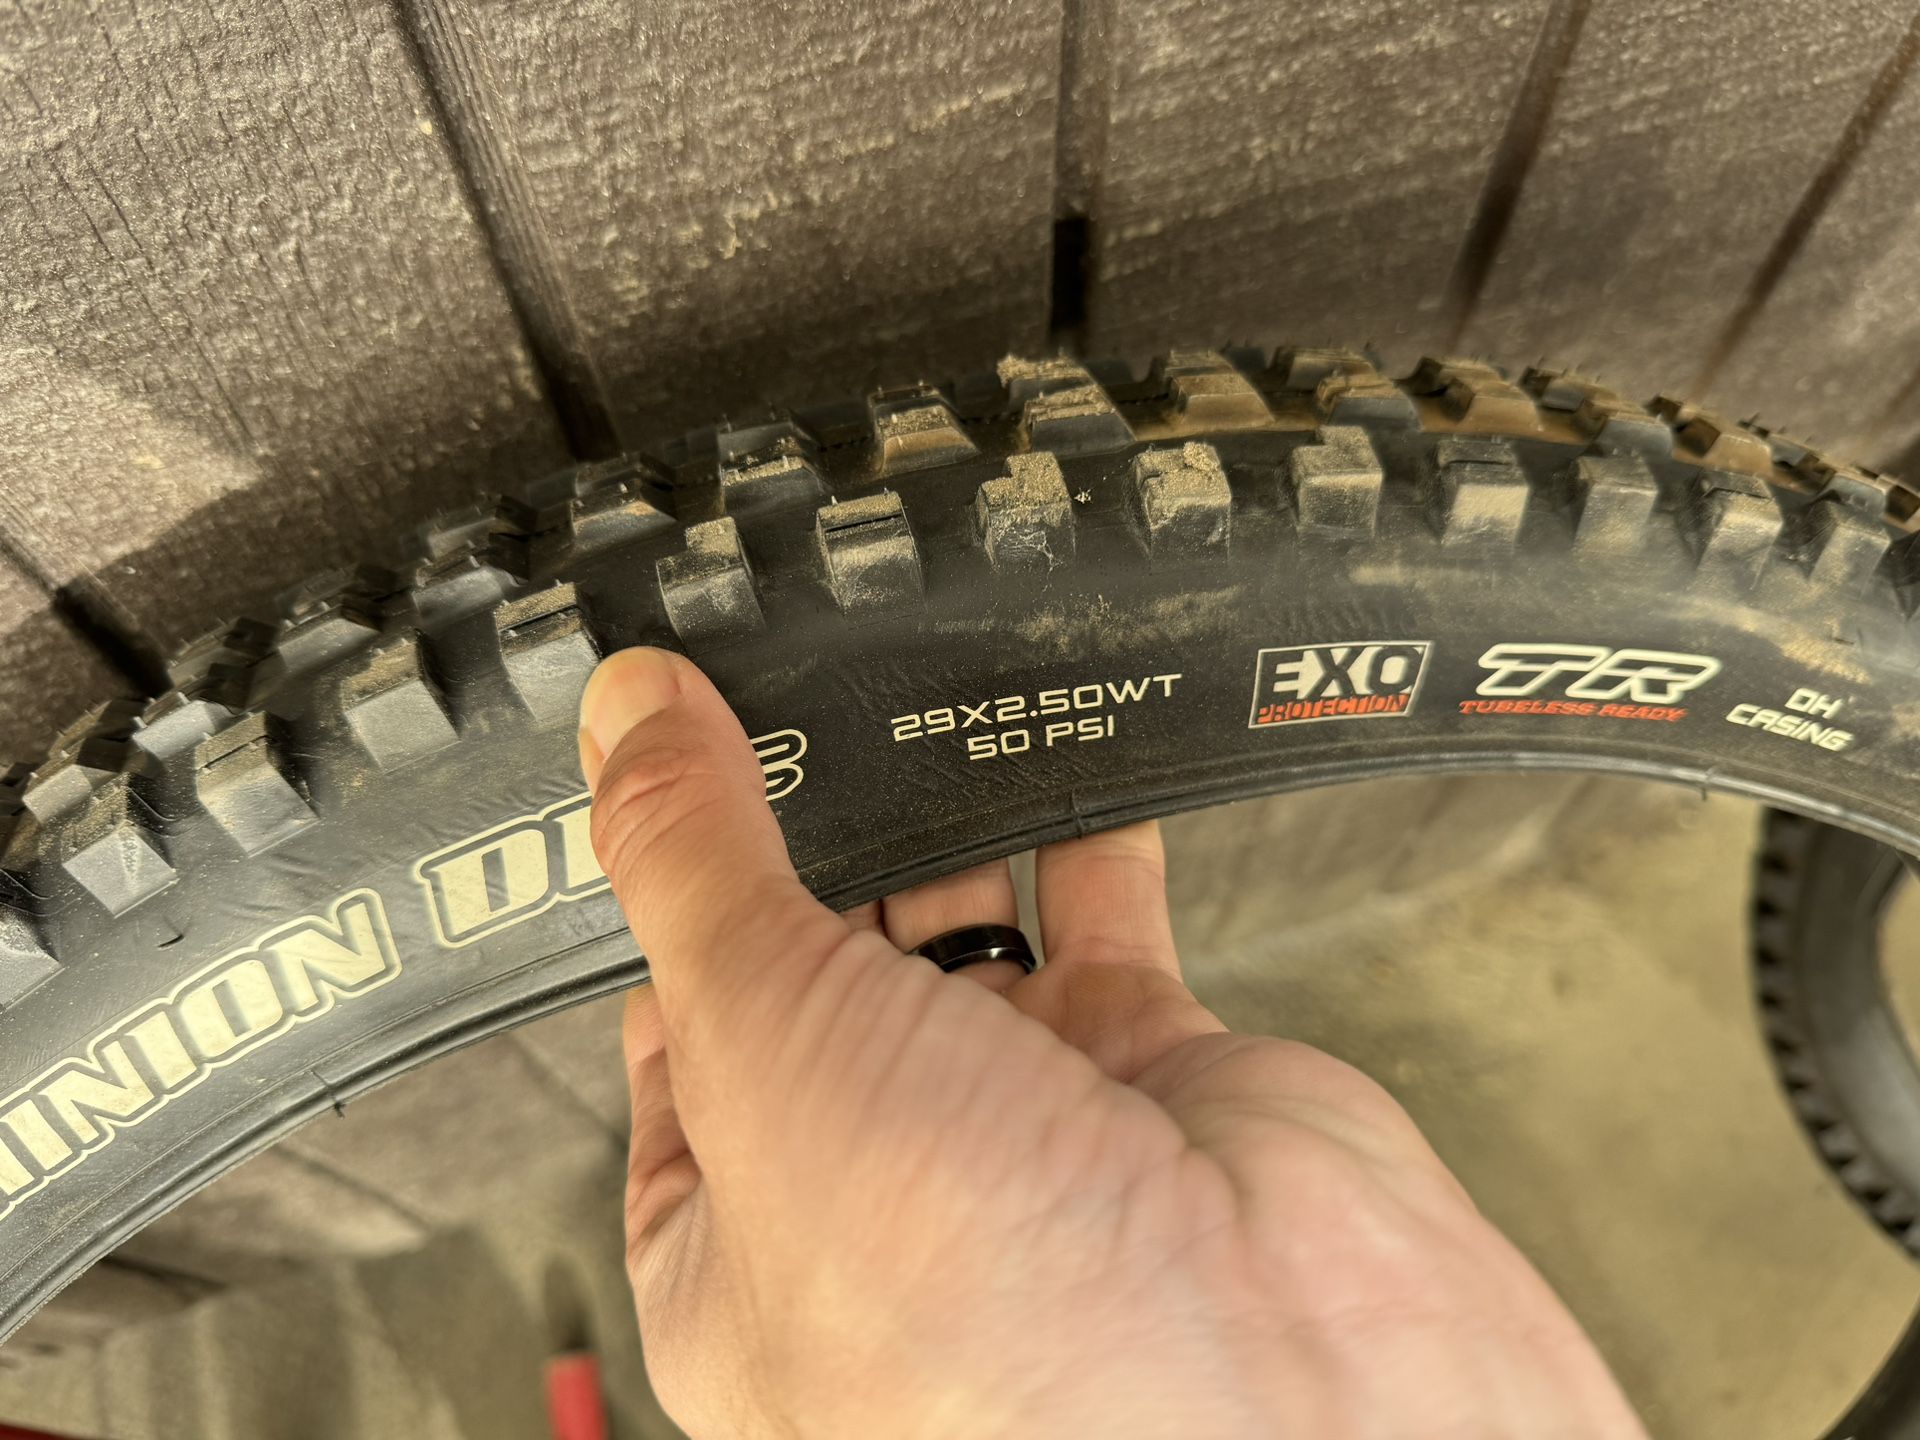 Maxxis 29 Tires 3 For 80$